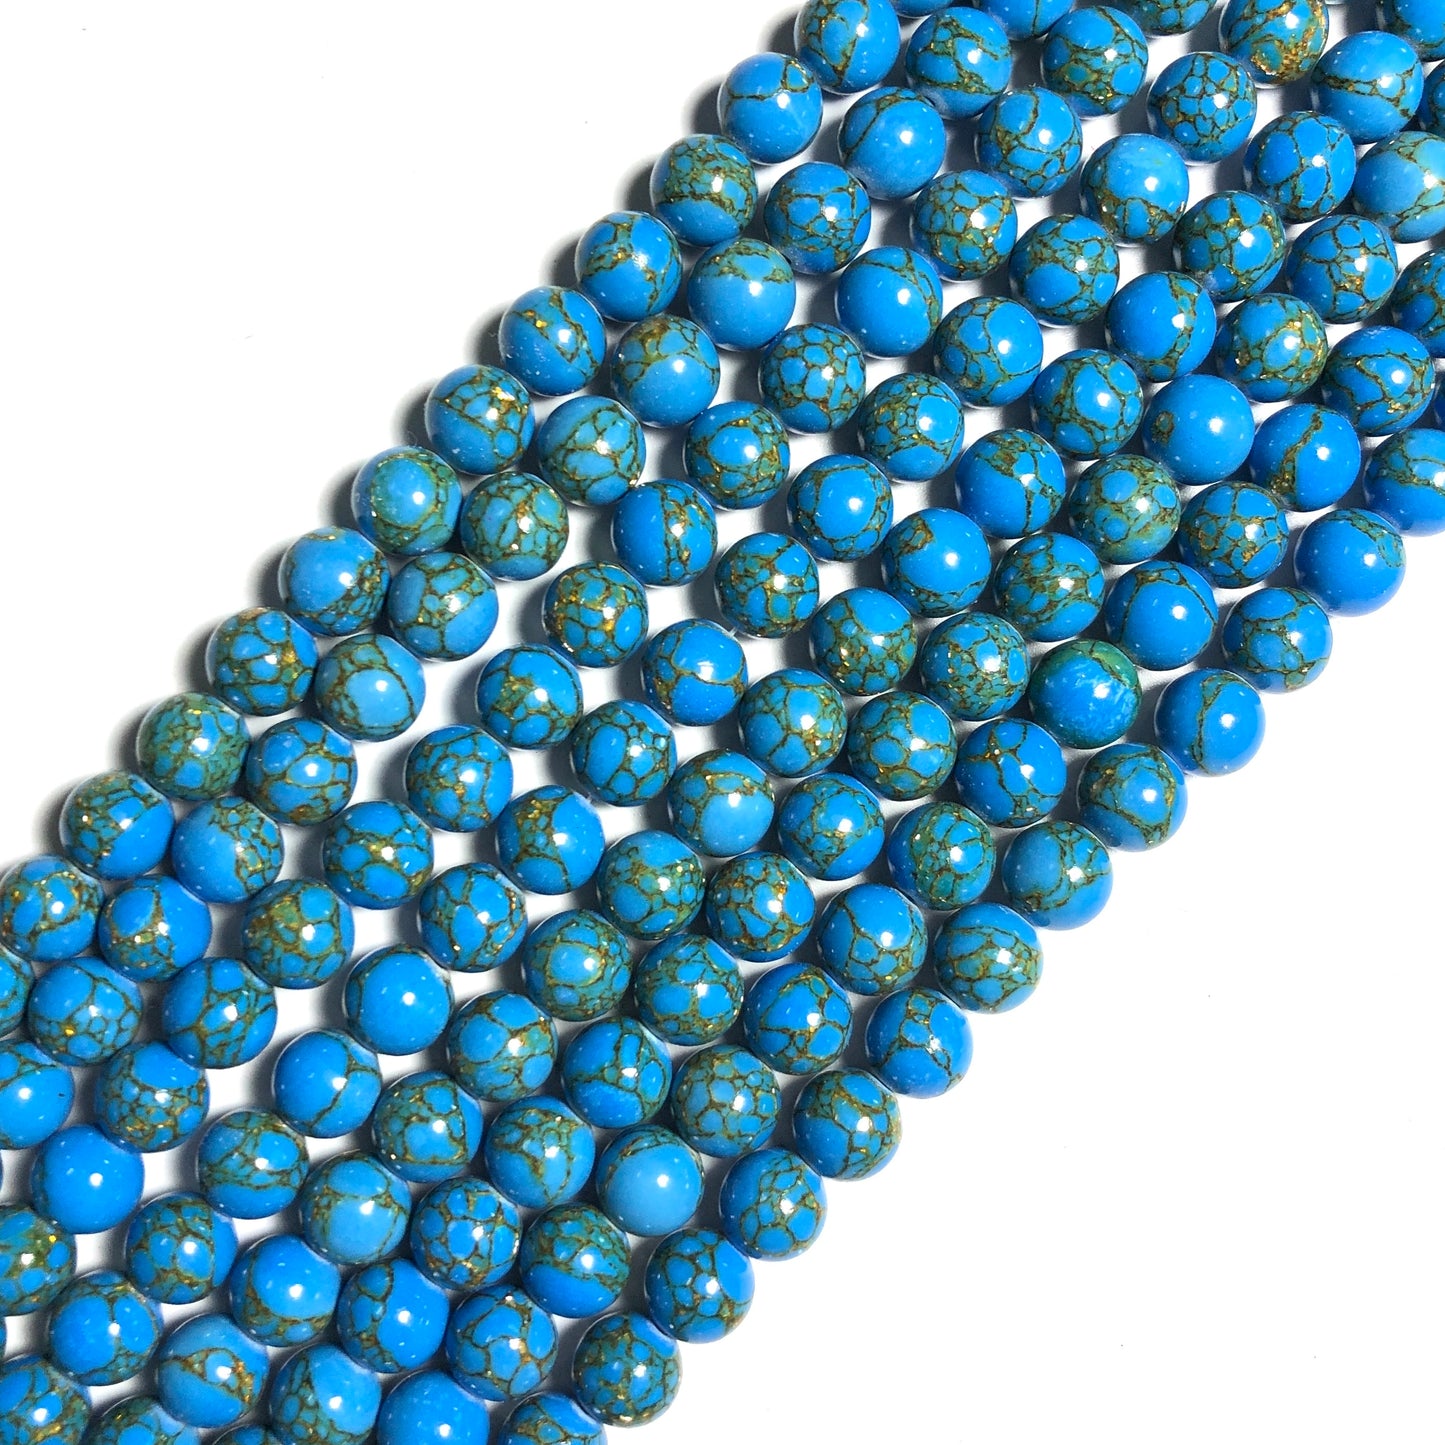 2 Strands/lot 8mm, 10mm Blue Gold Line Turquoises Round Stone Beads Stone Beads 8mm Stone Beads Turquoise Beads Charms Beads Beyond